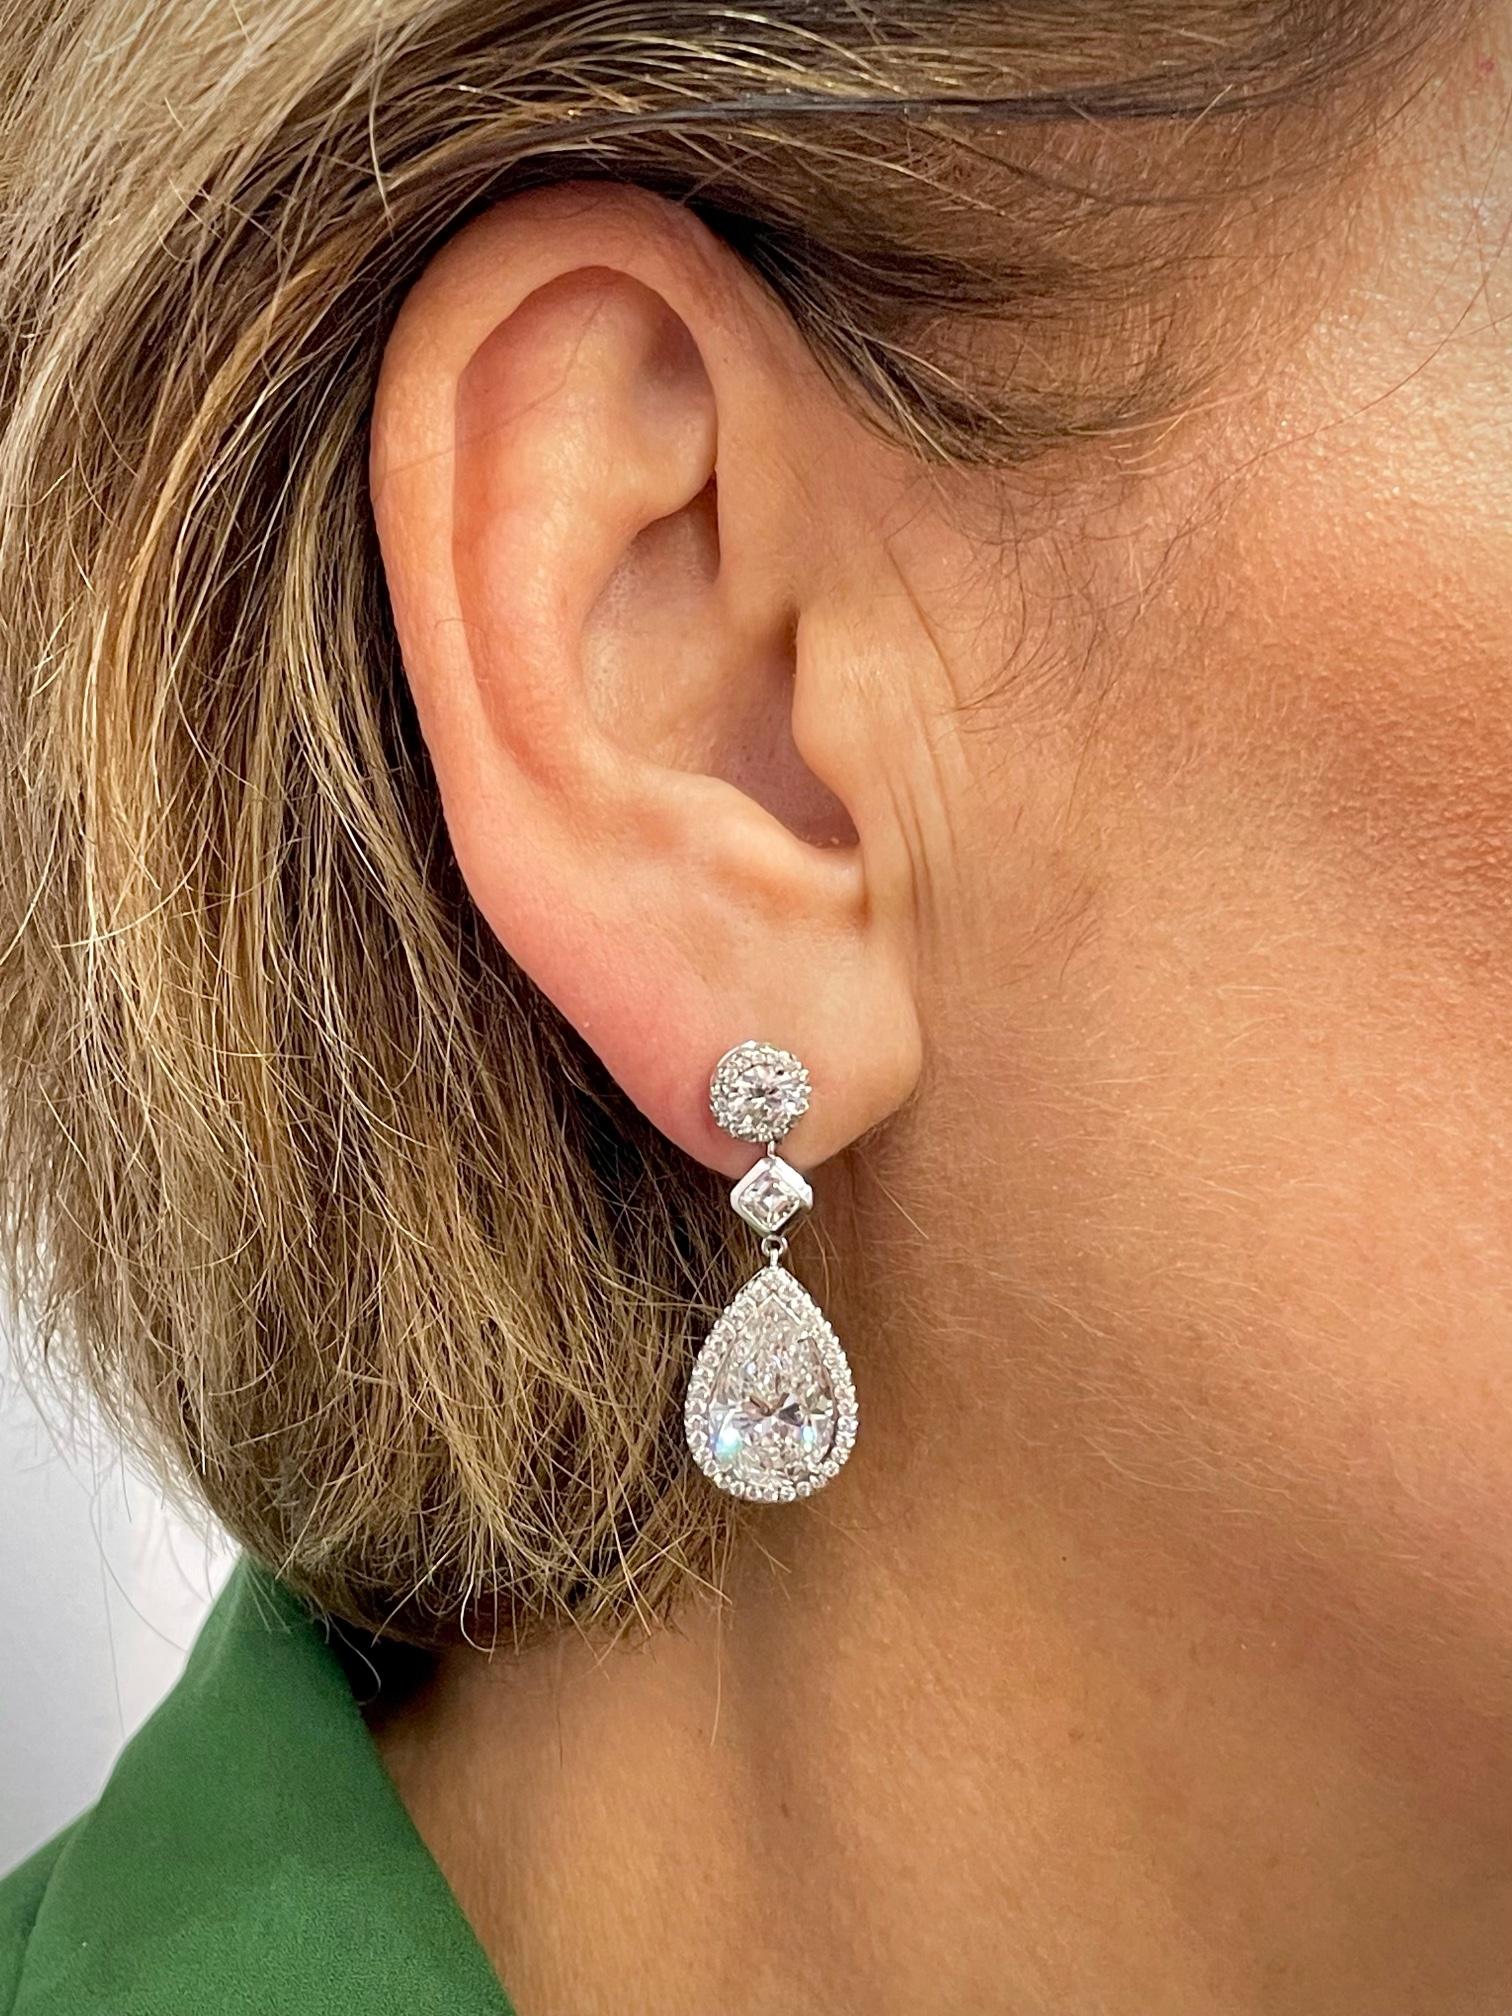 Impressive pair of pear shape diamond earrings suspending from a round diamond stud. Crafted by hand in 18K white gold.
The pear shapes weigh 5.10 carats F/SI2, and 5.06 carats E/SI1. 
The 2 round diamond studs weigh a total of 1.07 carats F/SI1.